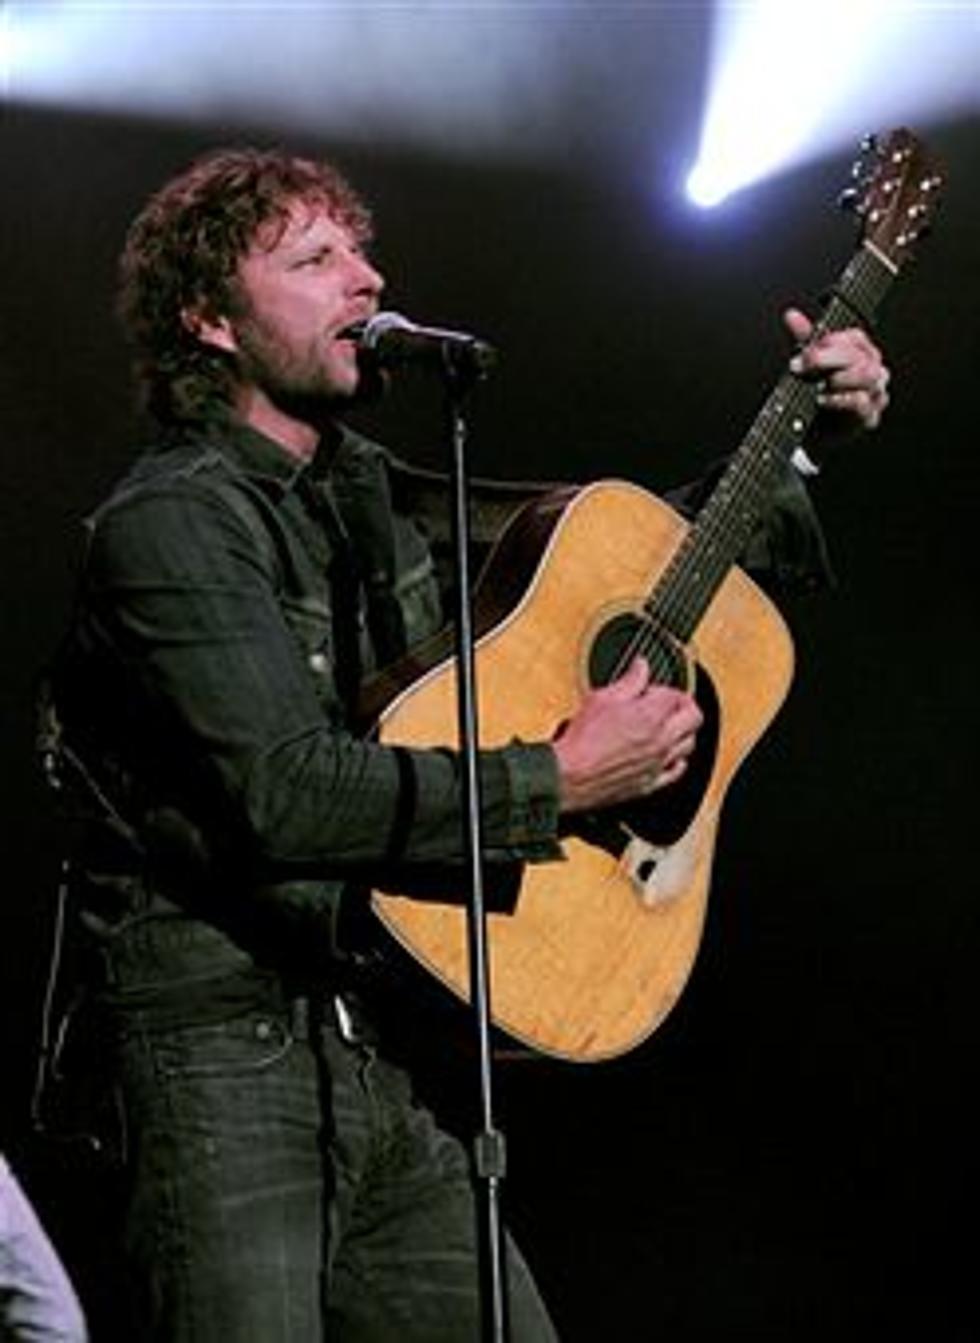 Win Tickets With Ken And Cathy to Dierks Bentley’s SOLD OUT Show